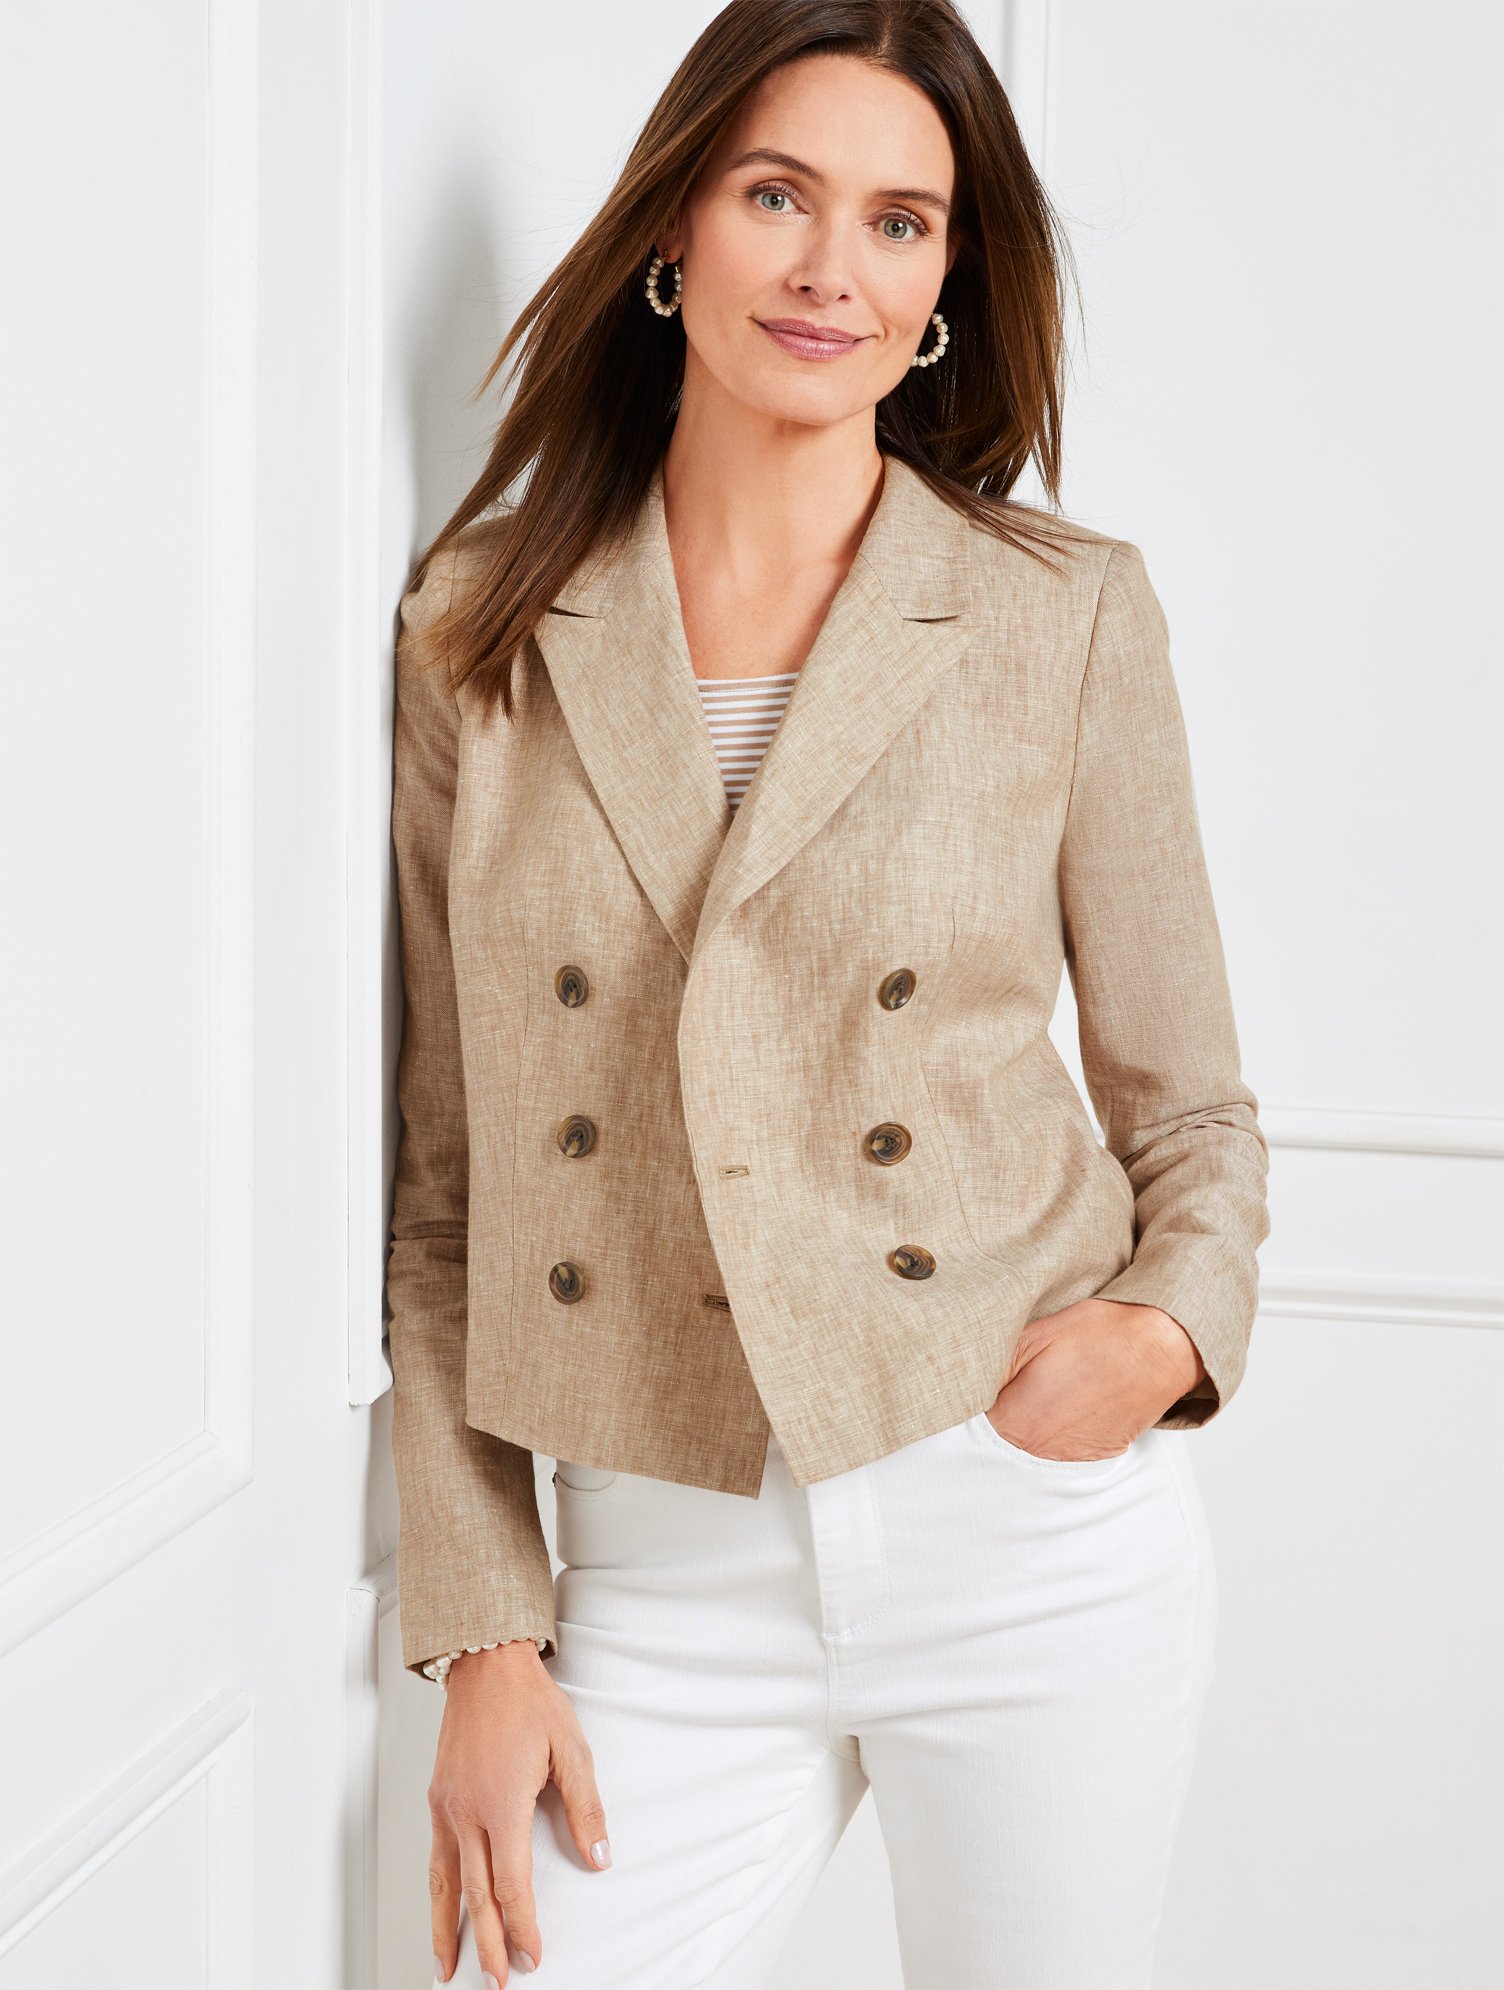 Talbots Cropped Linen Jacket - Taupe/white - 20  In Taupe,white